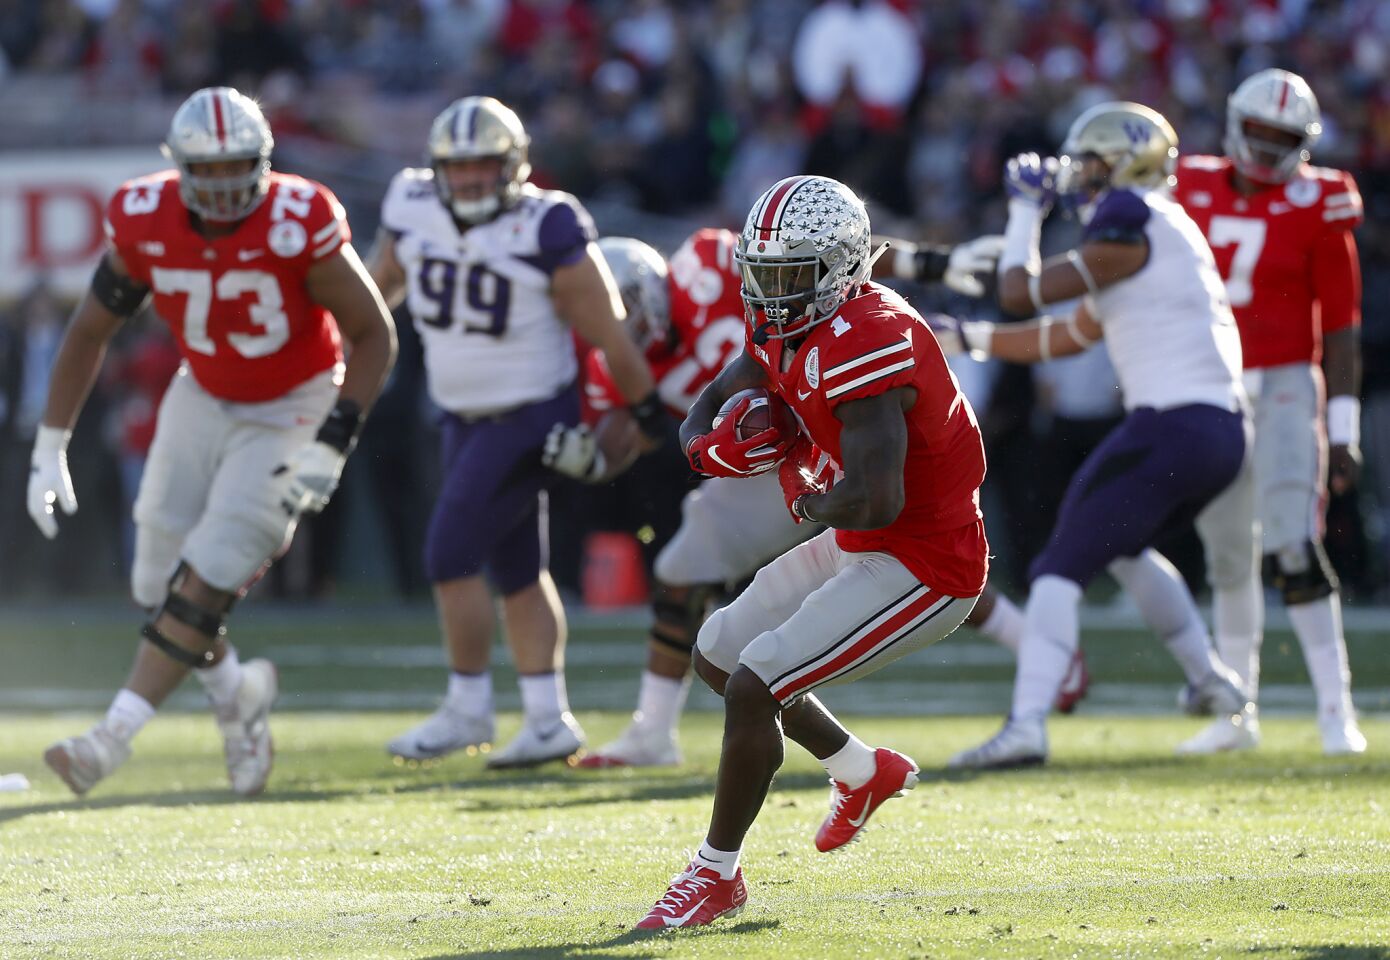 Ohio State wide receiver Johnnie Dixon III turns upfield after making a catch against Washington on Jan. 1 at the Rose Bowl Game in Pasadena.